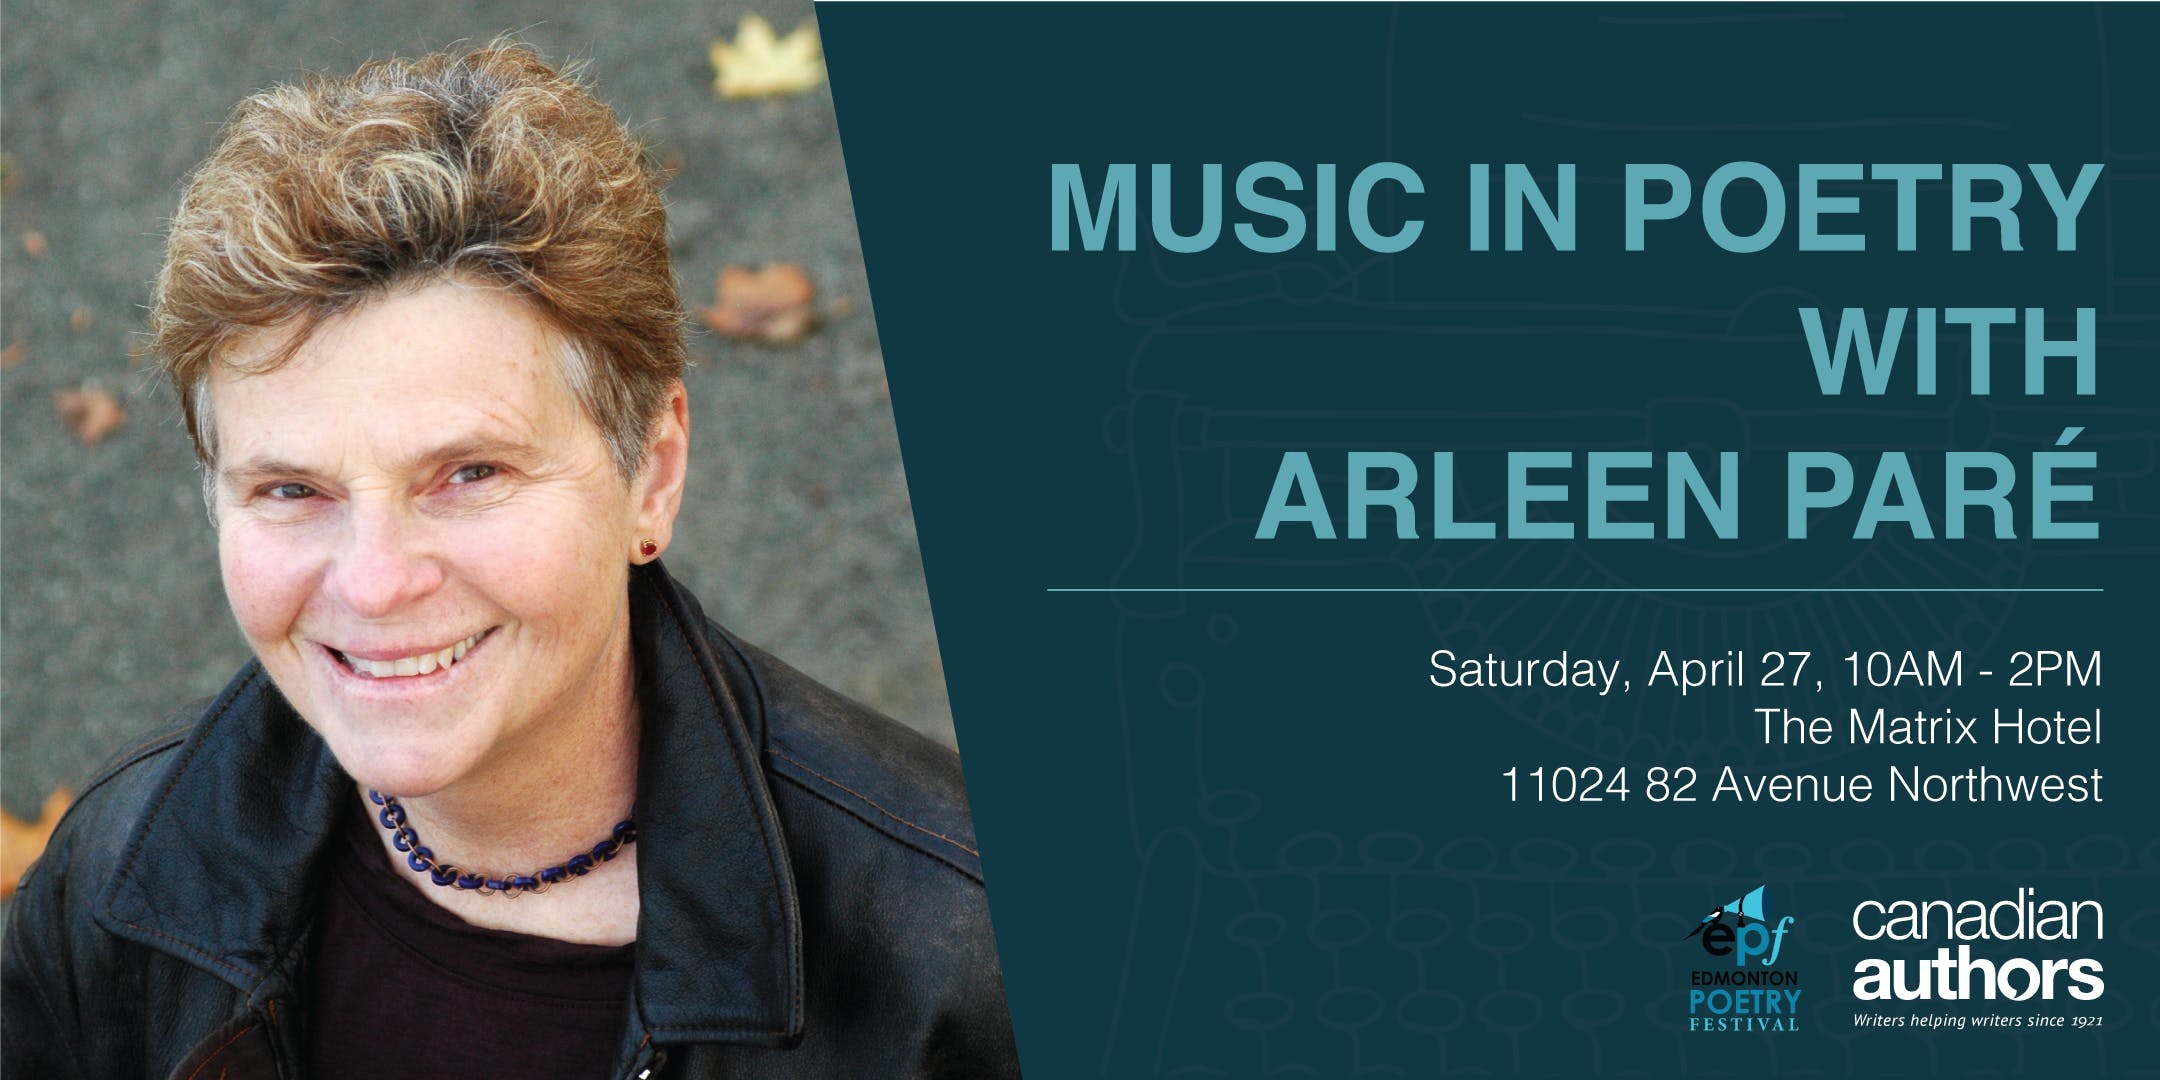 Music in Poetry with Arleen Pare